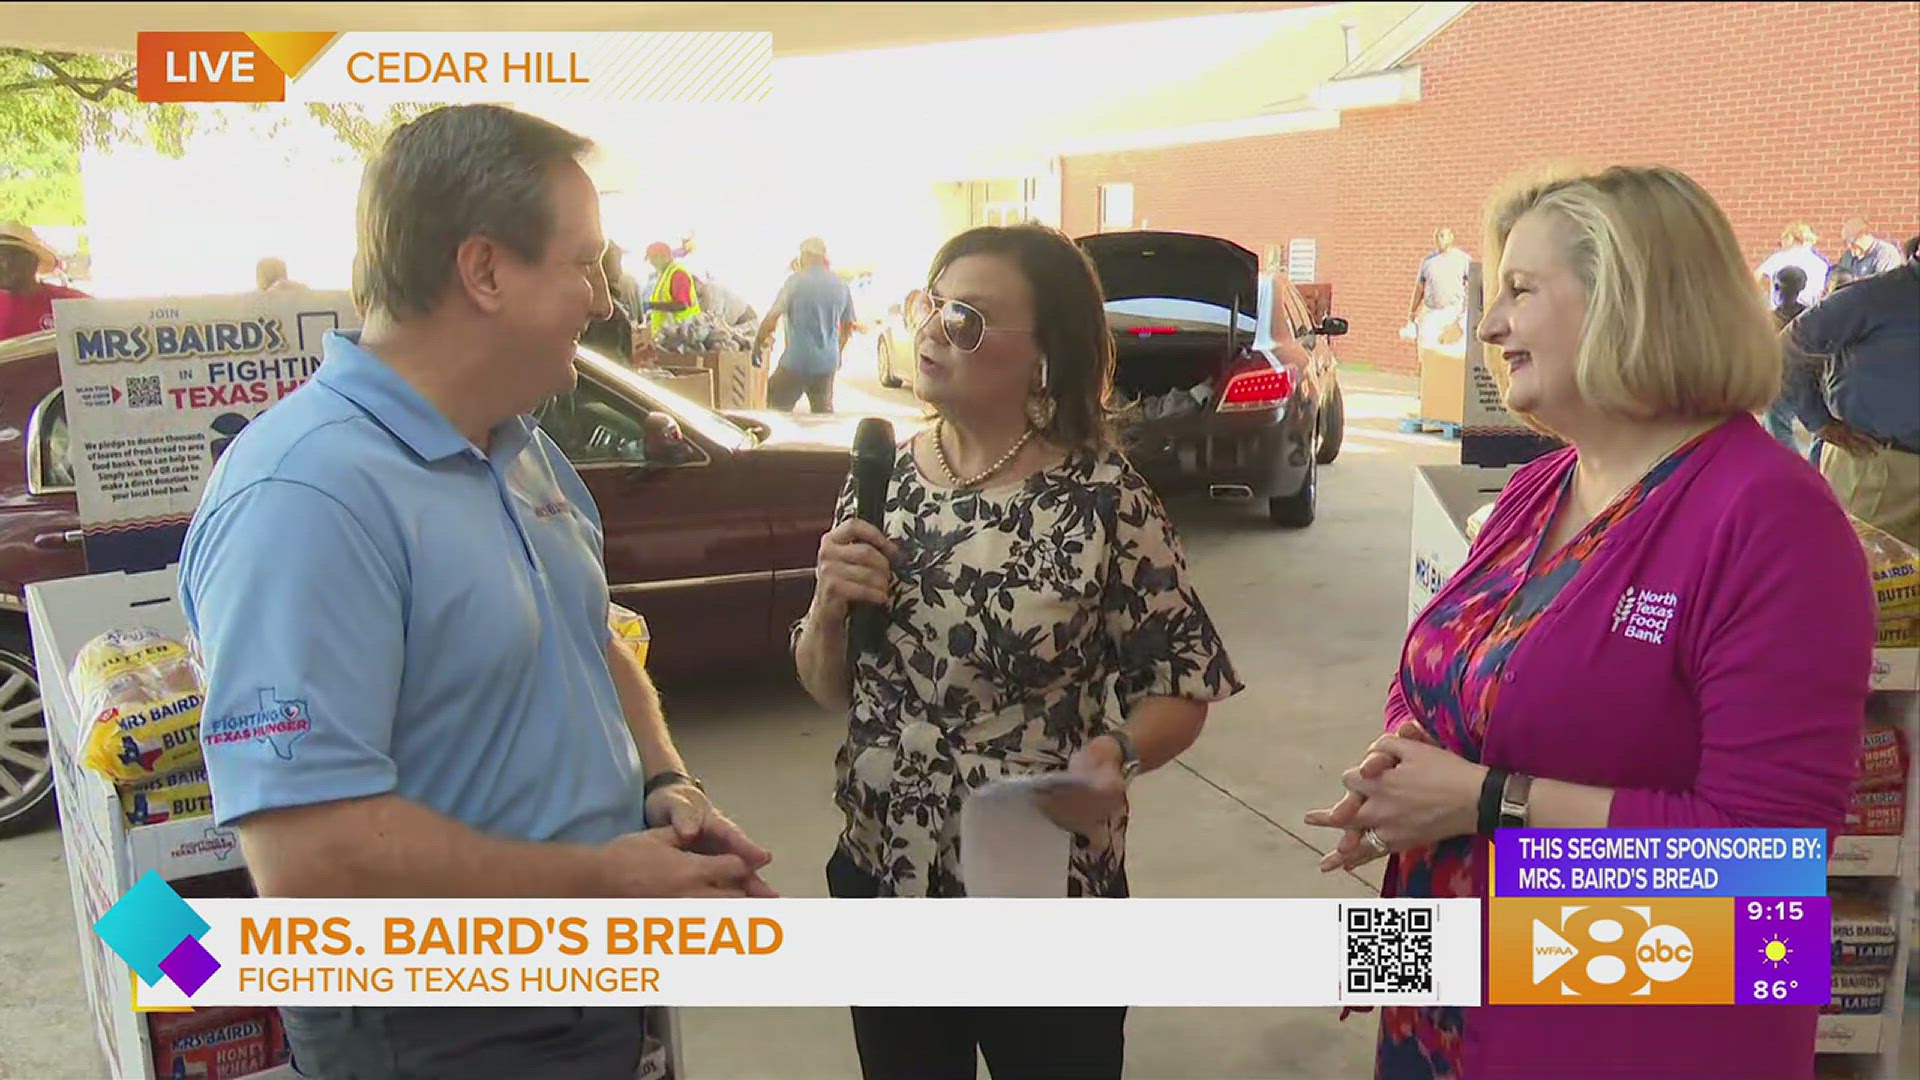 This segment is sponsored by Mrs. Baird's Bread.